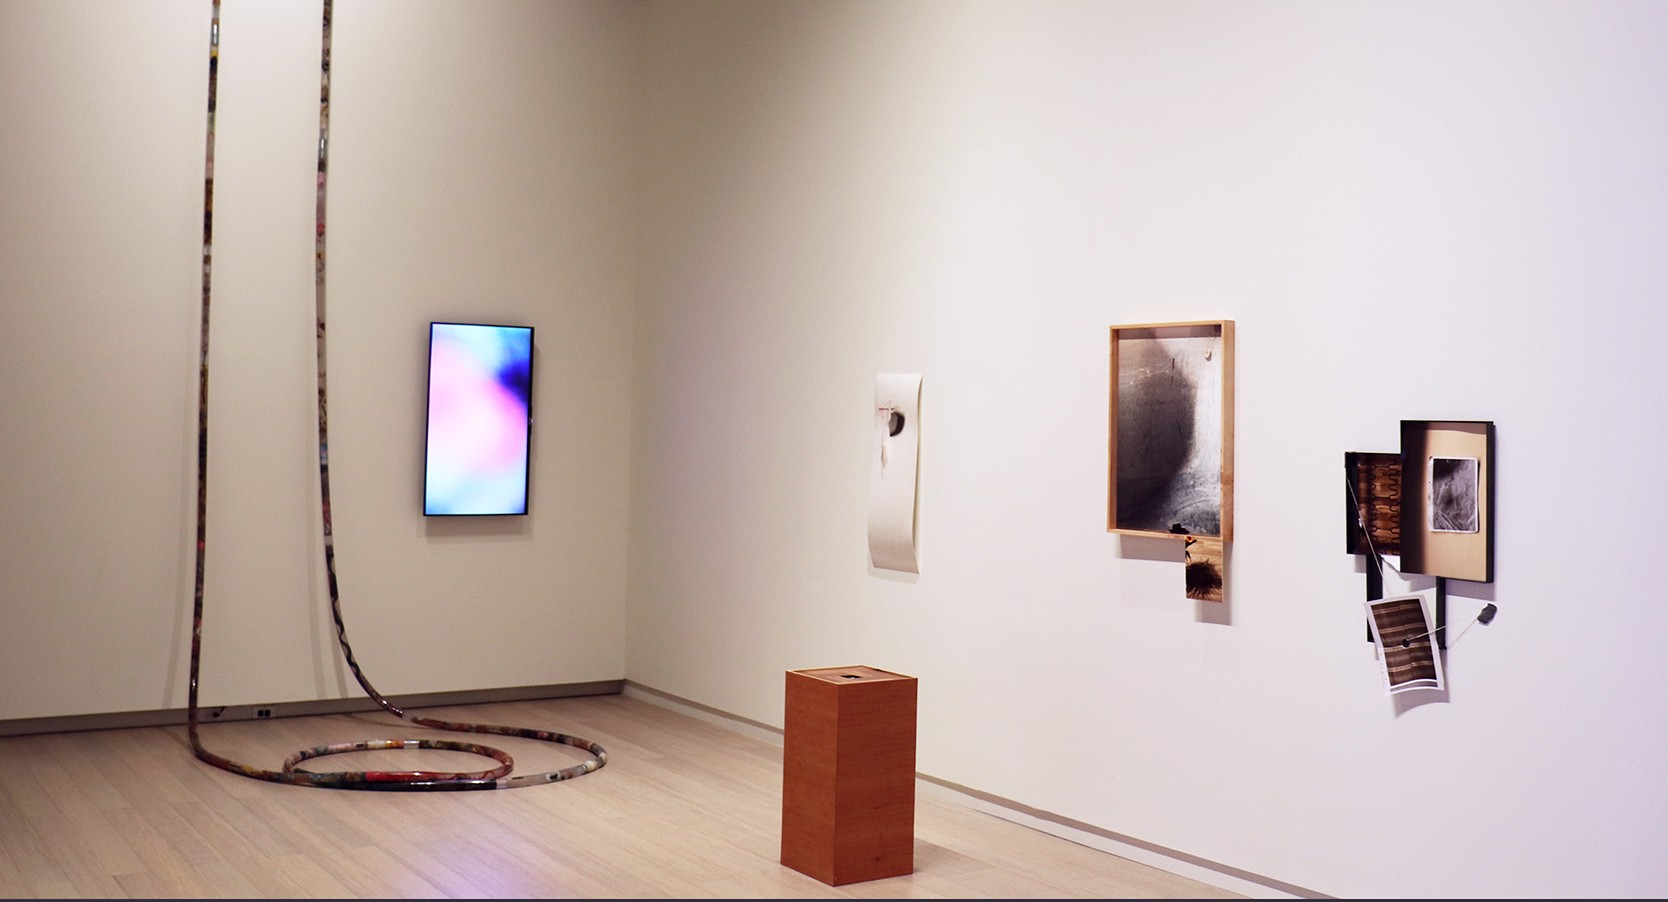 Installation view of the 2019 First-Year MFA Exhibition, on view at the Wallach Art Gallery, Columbia University March 29 – April 14, 2019. Photograph by Eddie José Bartolomei.